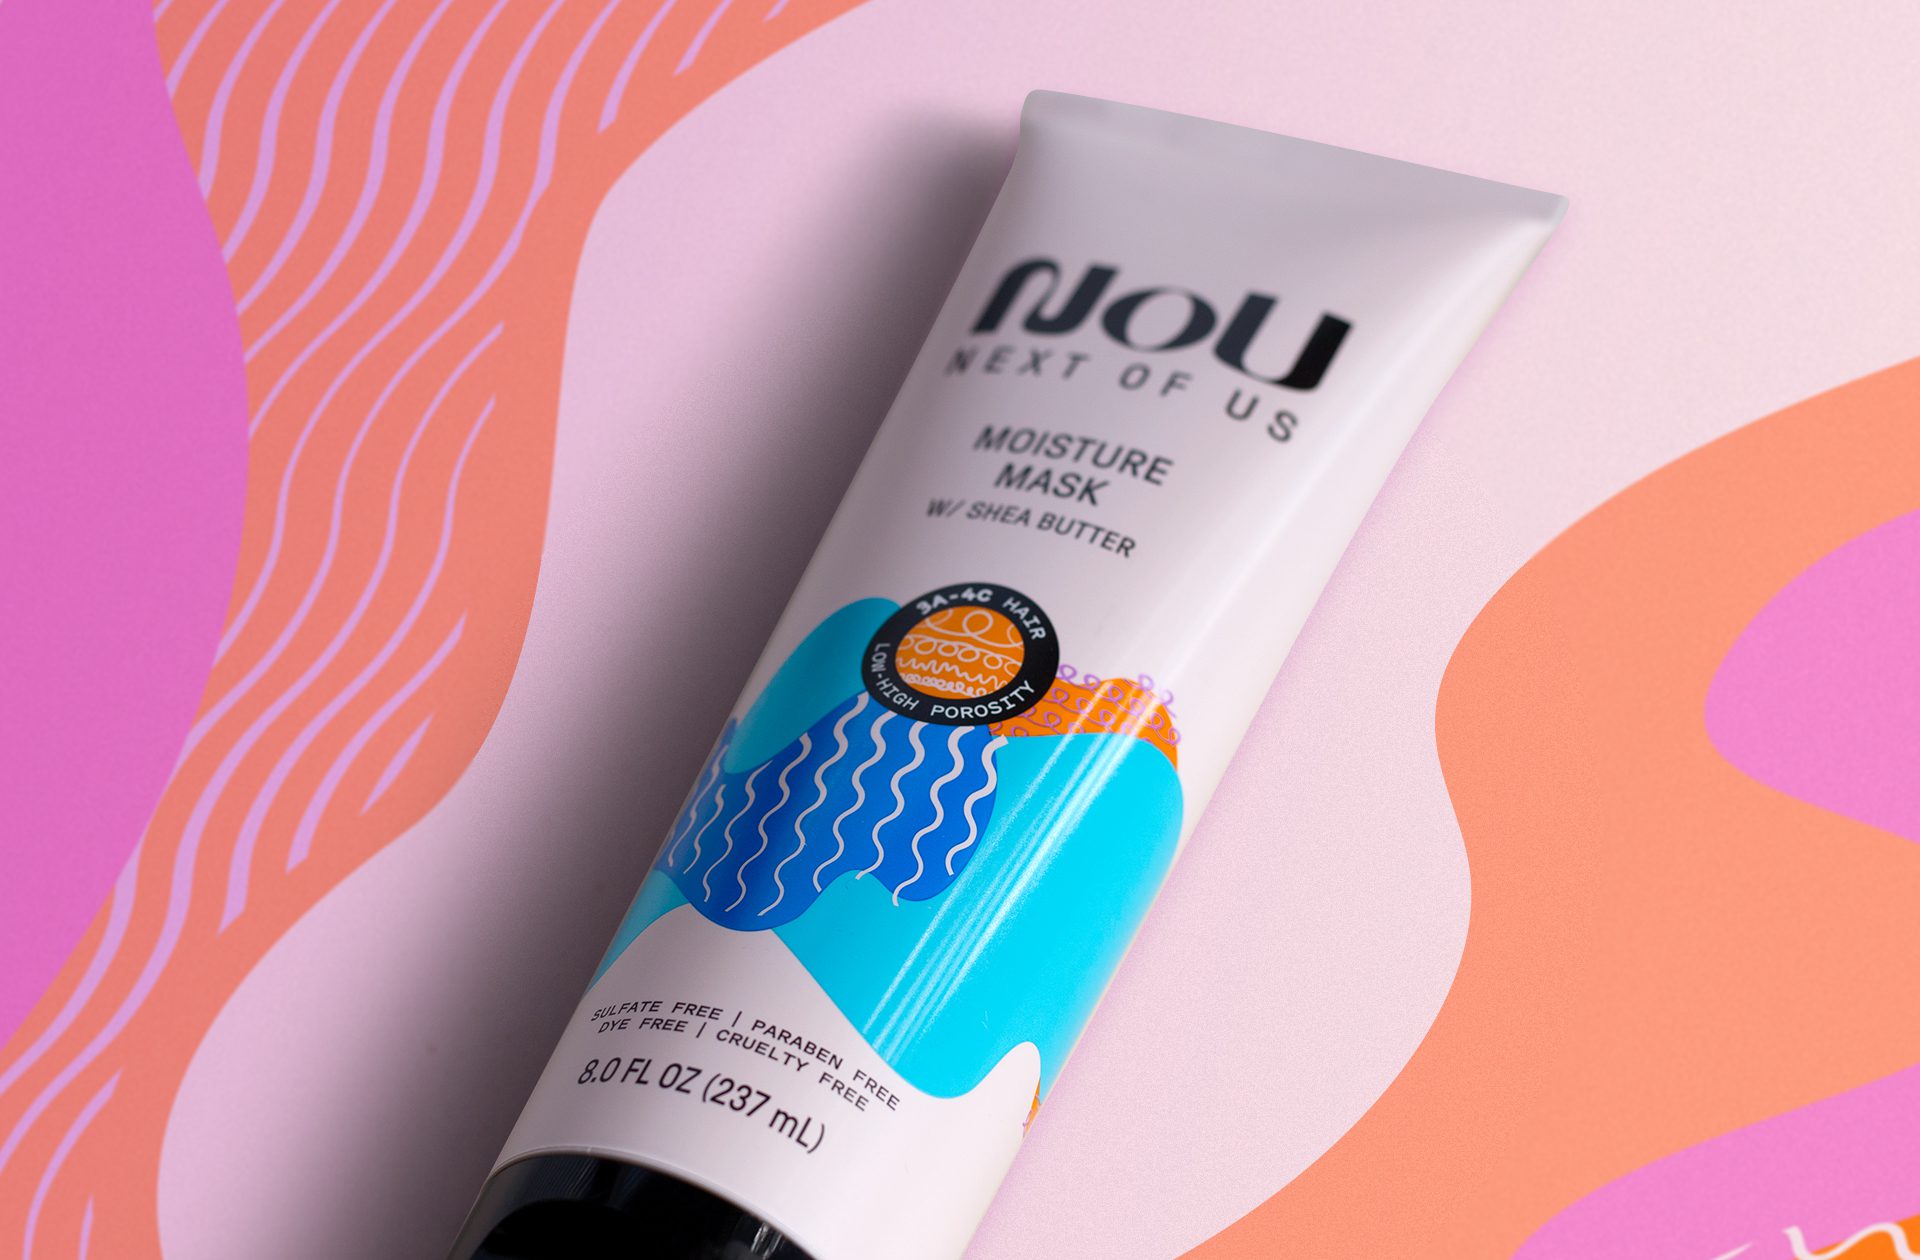 Product photography of a nou hair care moisture mask, showcasing packaging design services for consumer packaged goods.